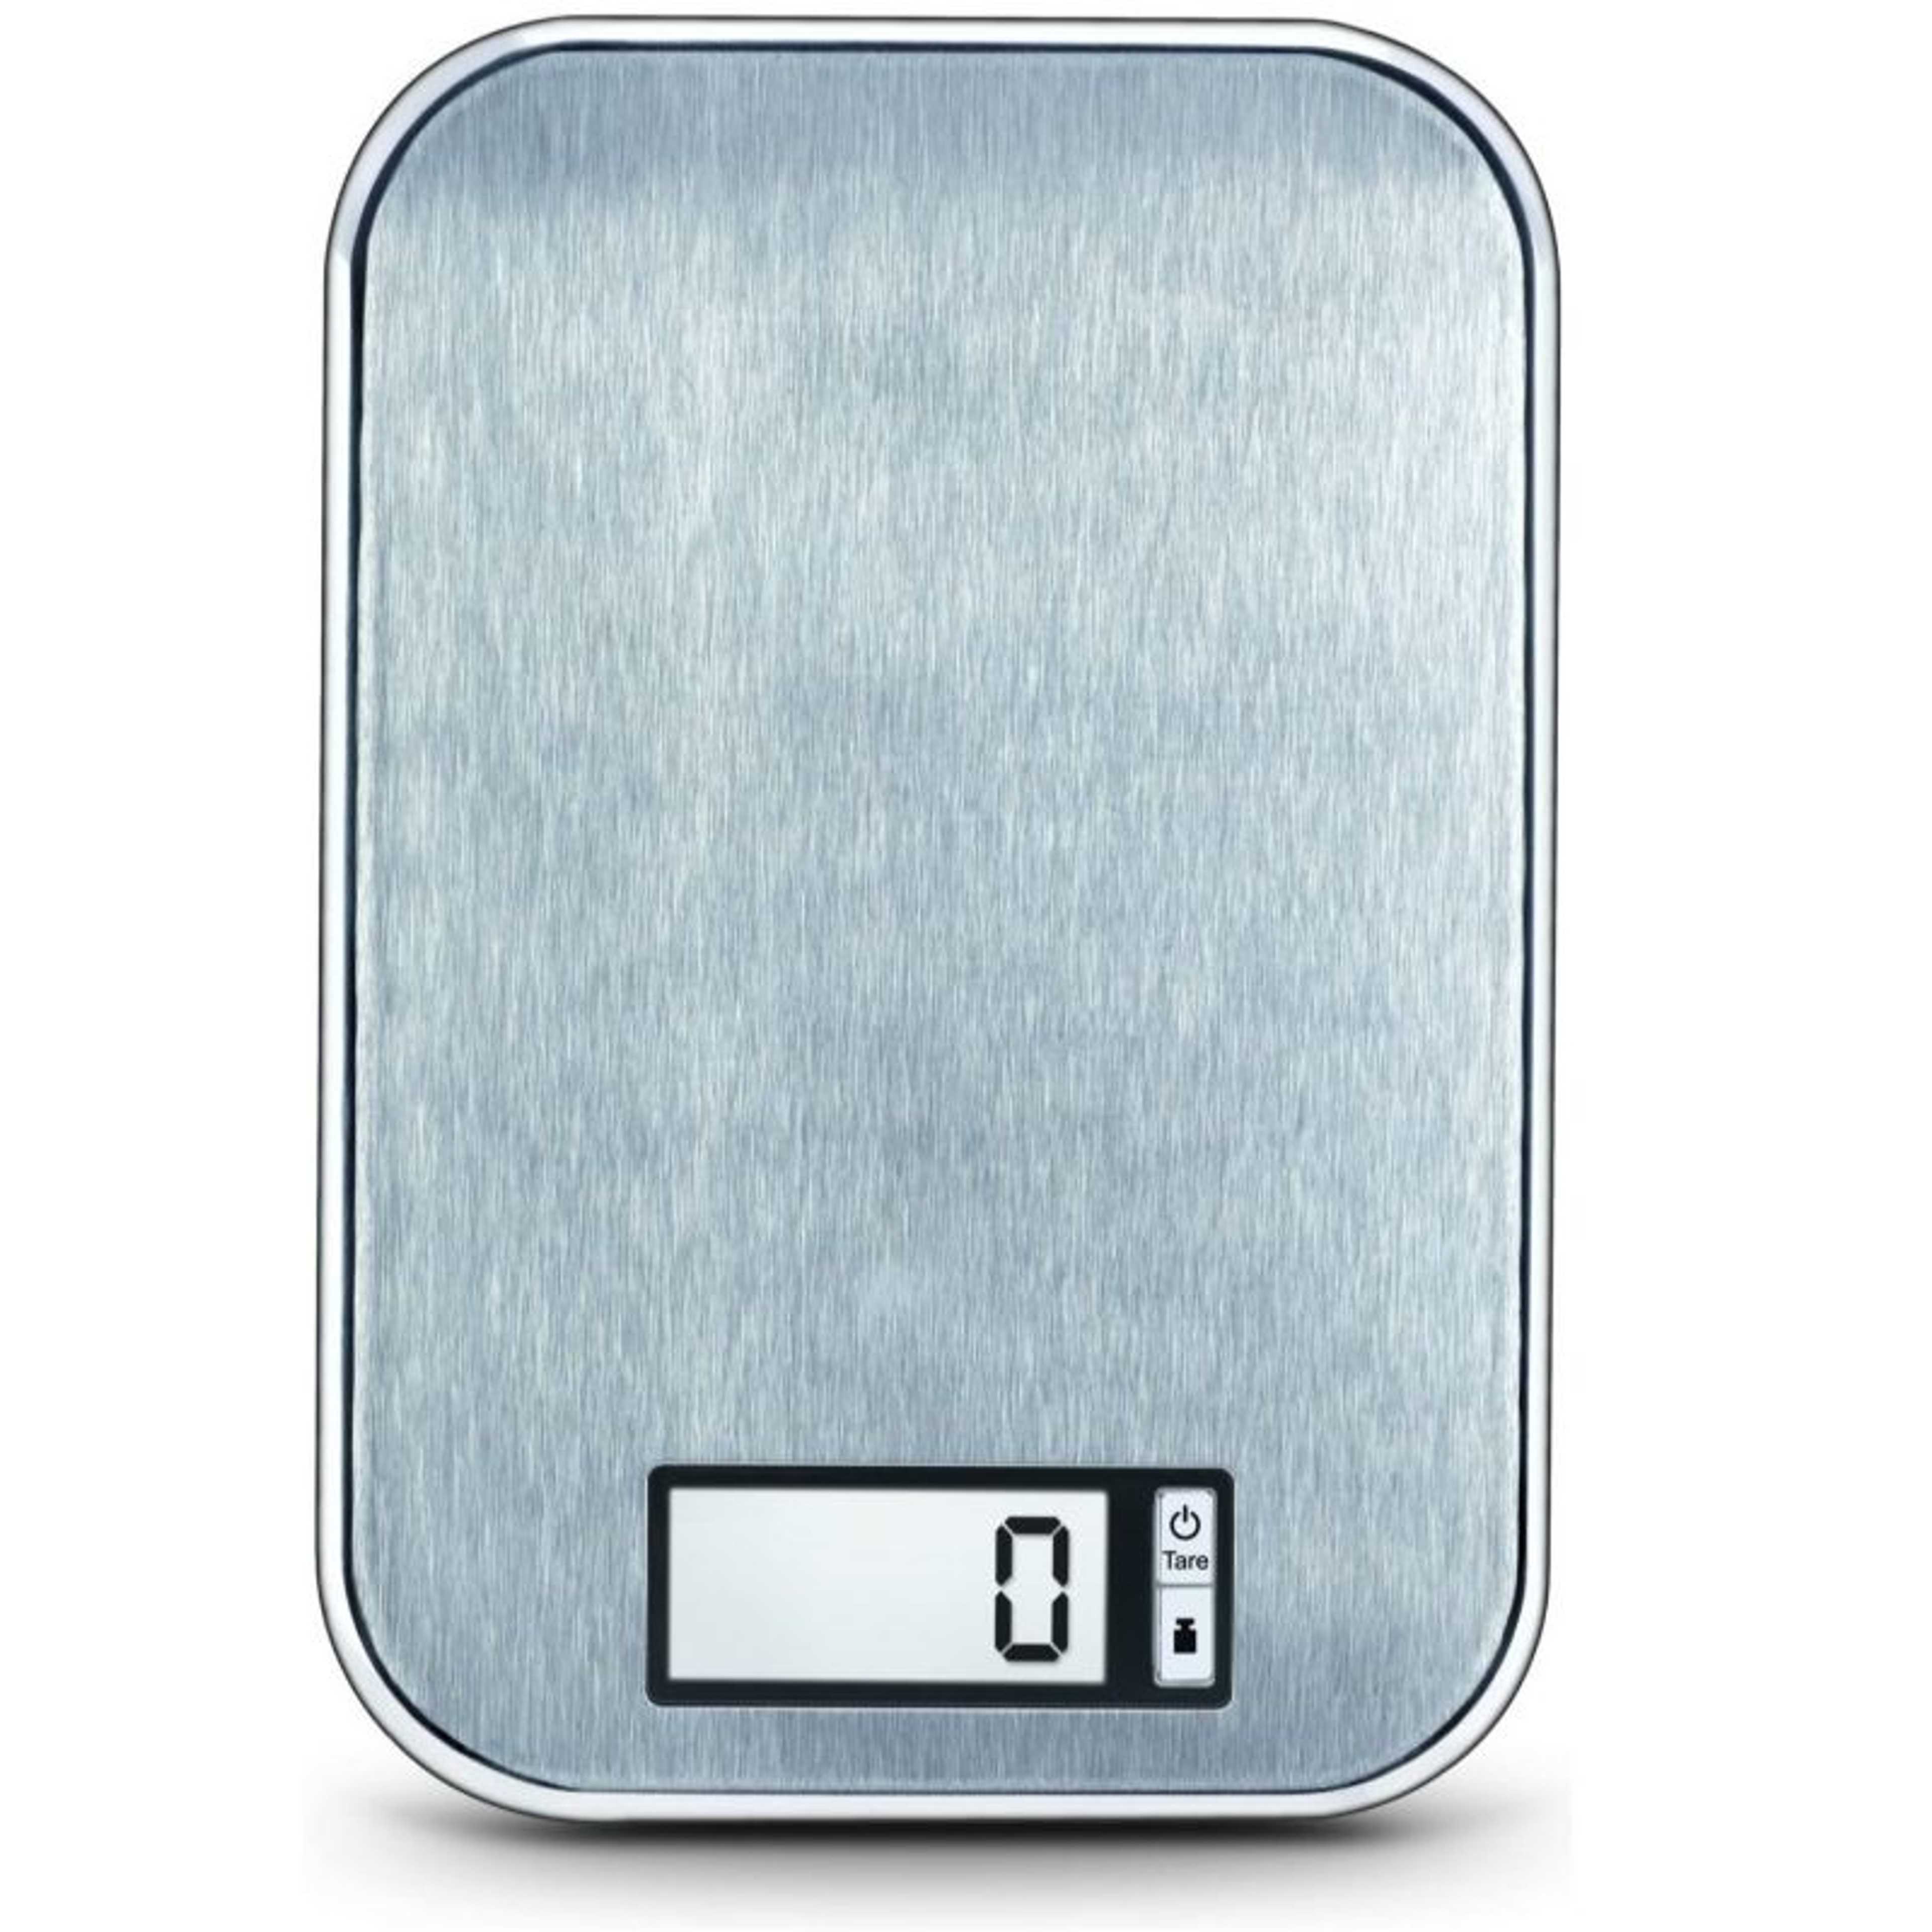 LCD Digital Display Professional Kitchen/Jewelry Weighting Scale